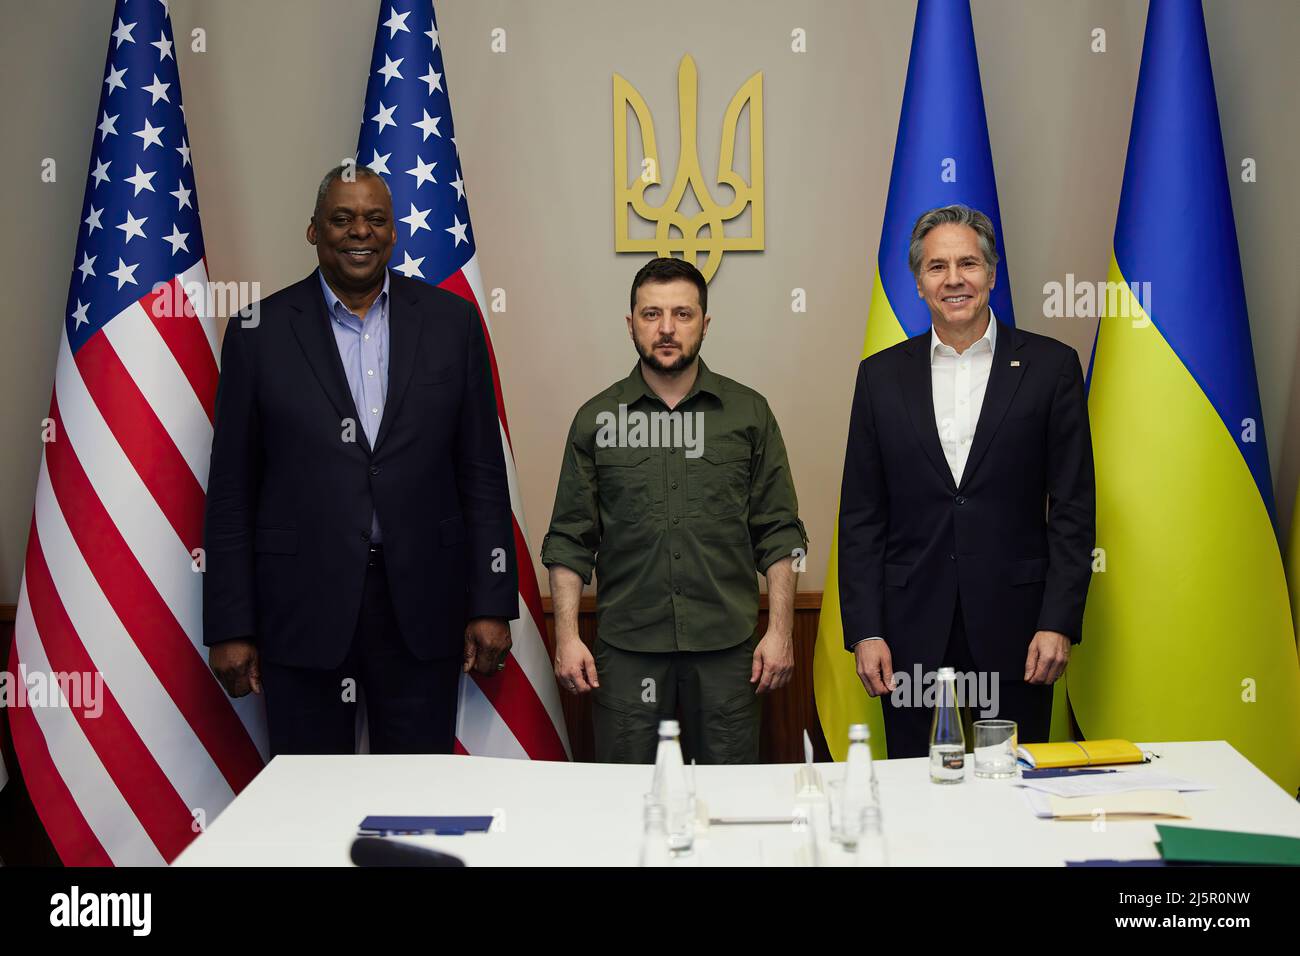 U.S. Secretary of State Antony J. Blinken and U.S. Secretary of Defense Lloyd J. Austin III visit Ukrainian President Volomydyr Zelensky and high ranking government officials in Kyiv, Ukraine, on April 24, 2022. The leaders talked about US arms and military aid, moving the U.S. Embassy back to Kyiv and humanitarian aid. Stock Photo